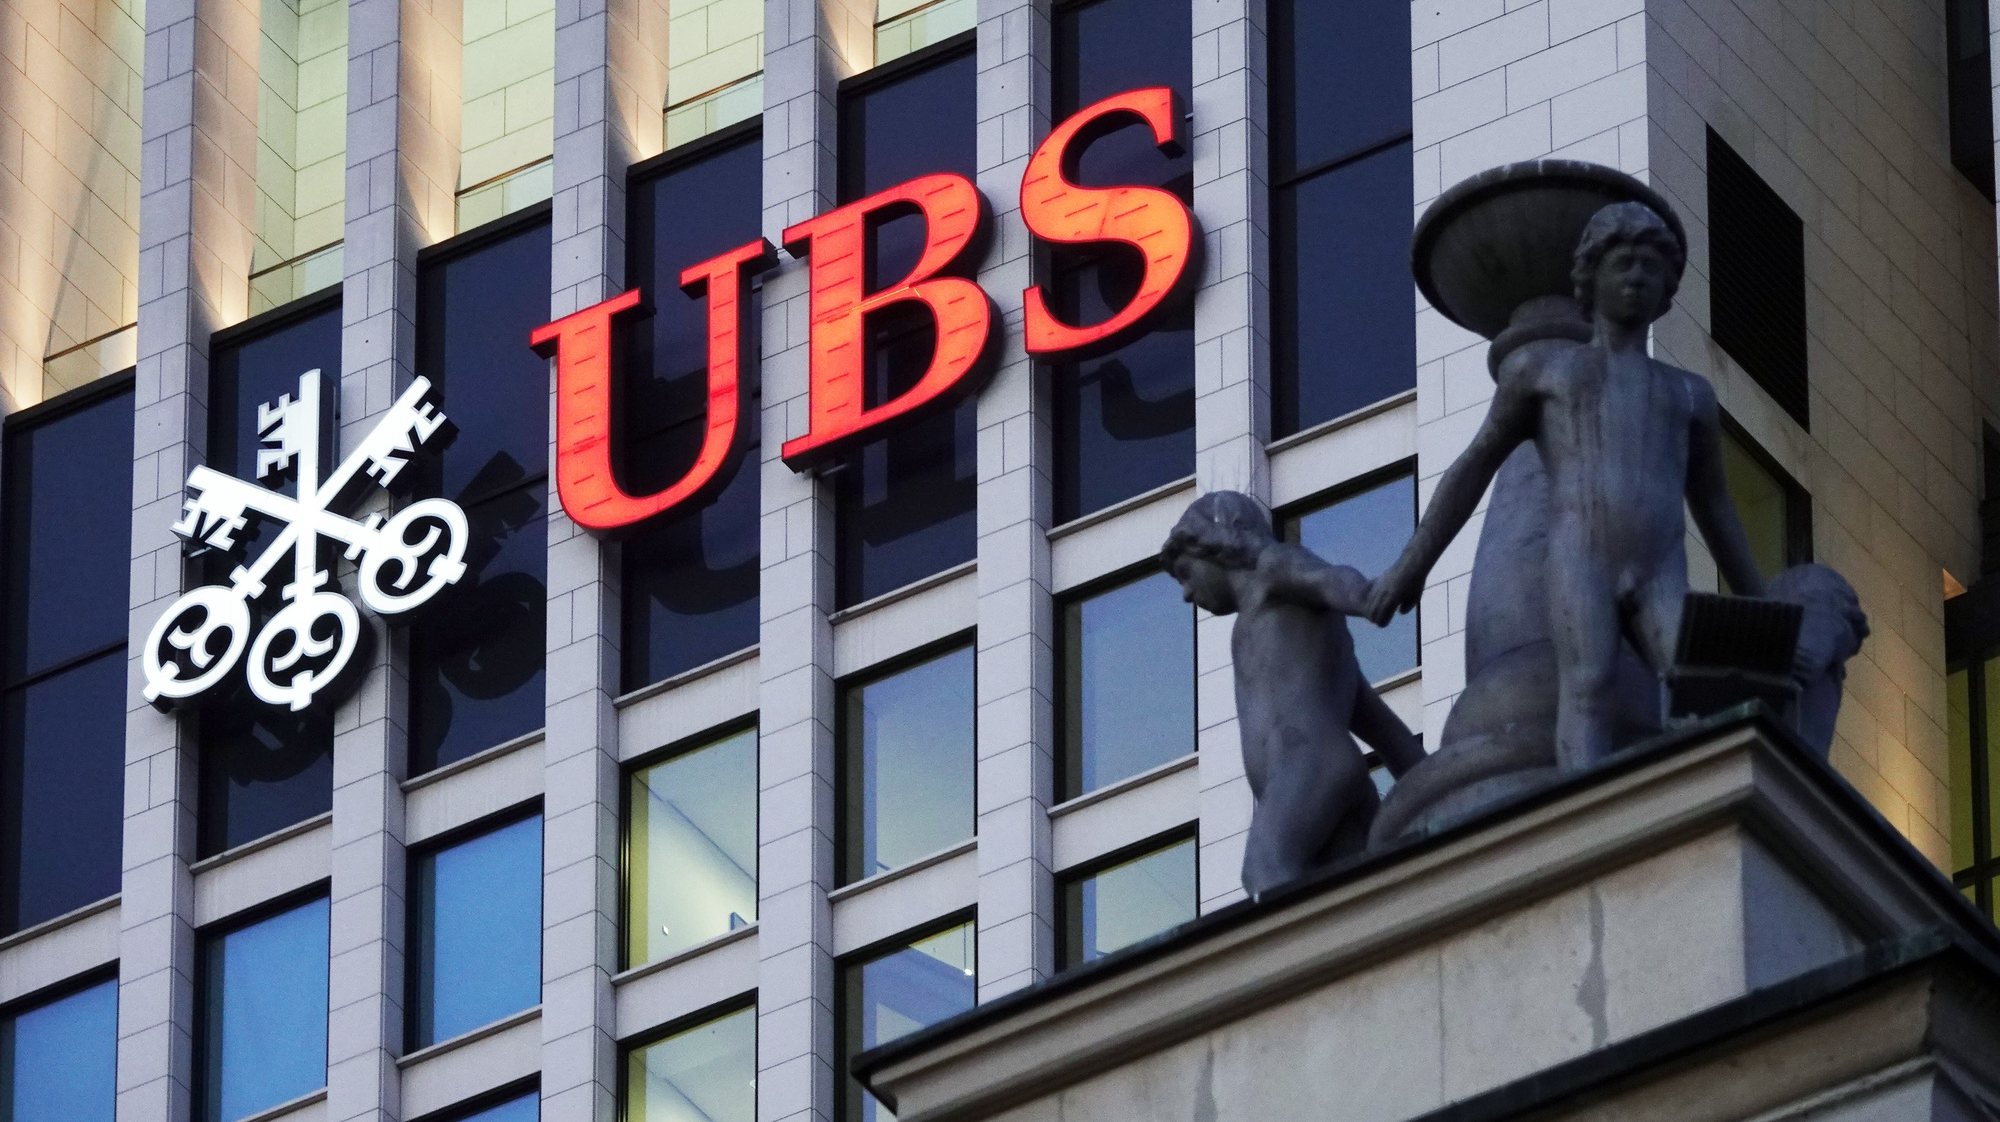 epa08963649 (FILE) - An image showing Swiss UBS bank signage behind the statues on the facade of Old Opera building in Frankfurt, Germany, 20 January 2020 (reissued 25 January 2021). UBS is to release their 4th quarter 2020 results on 26 January 2021.  EPA/MAURITZ ANTIN *** Local Caption *** 55784083